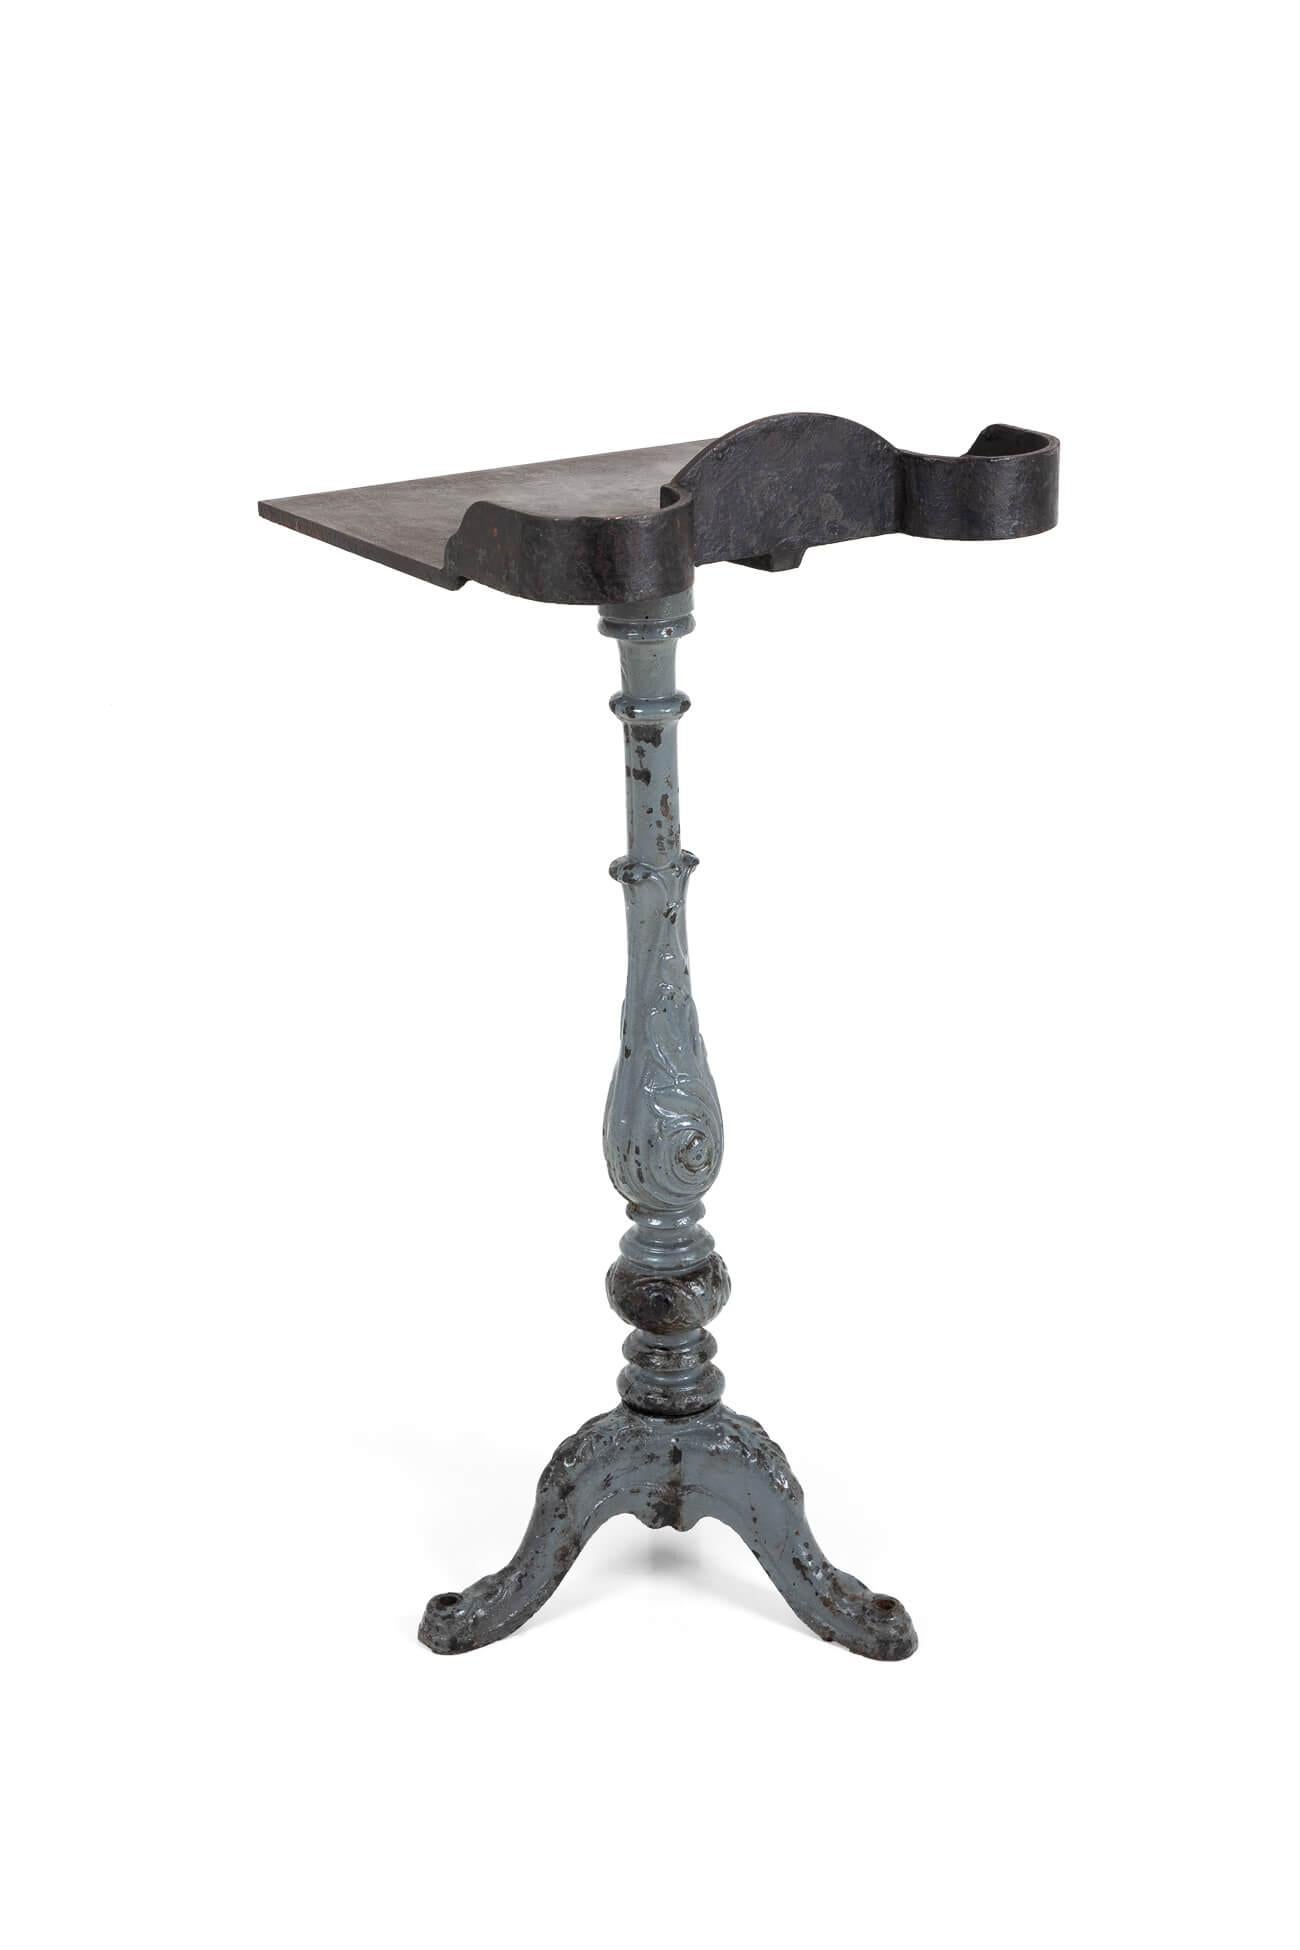 Rare Victorian print factory stand, made of cast iron and with original paint to the stand’s leg. Originally used in a British print factory, inkwells were held in the two curved recesses. Would make the most fabulous front-of-house restaurant bar